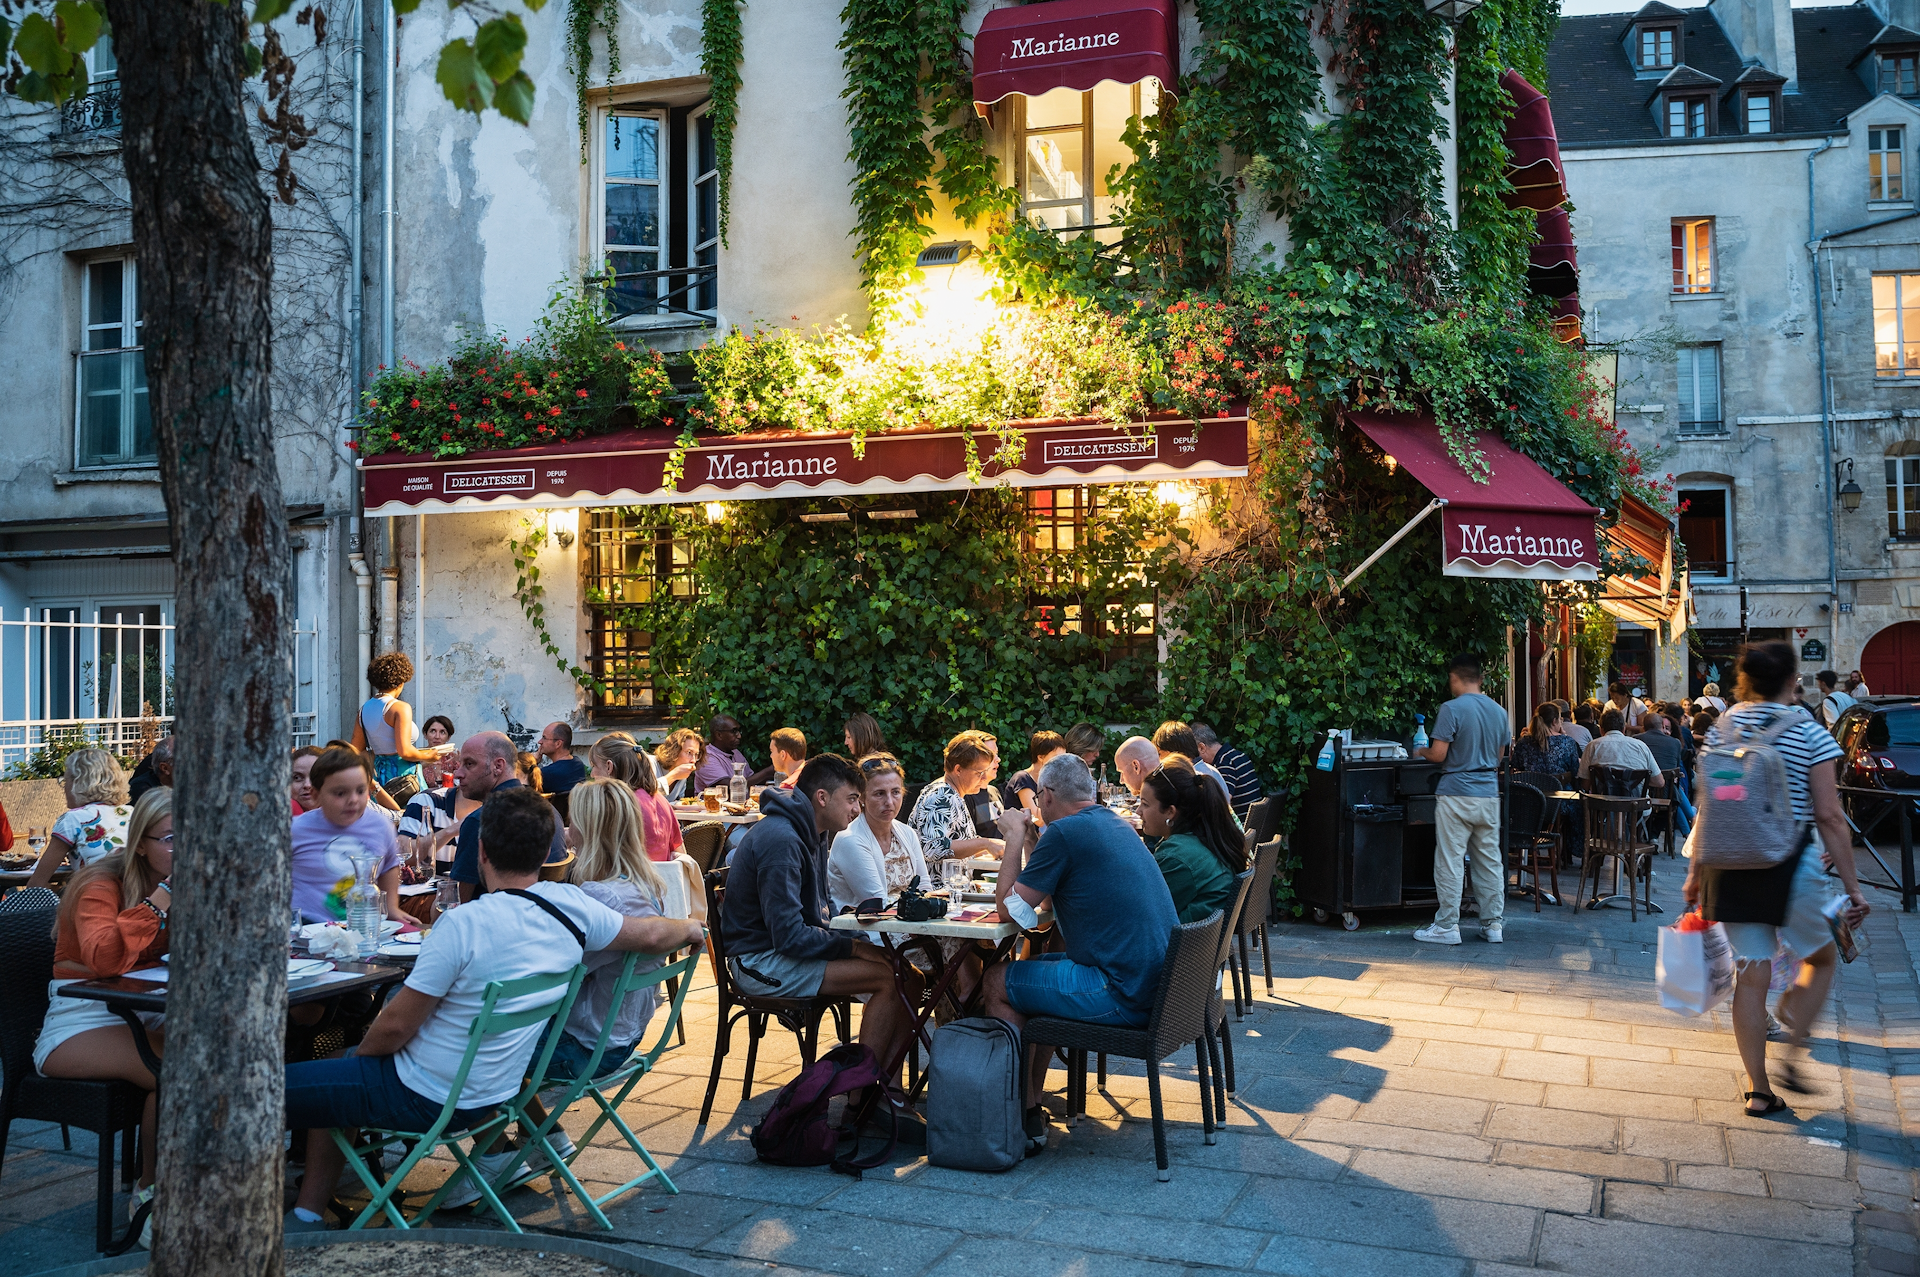 People dining at outdoor terraces during an evening in the Marais neighborhood Paris